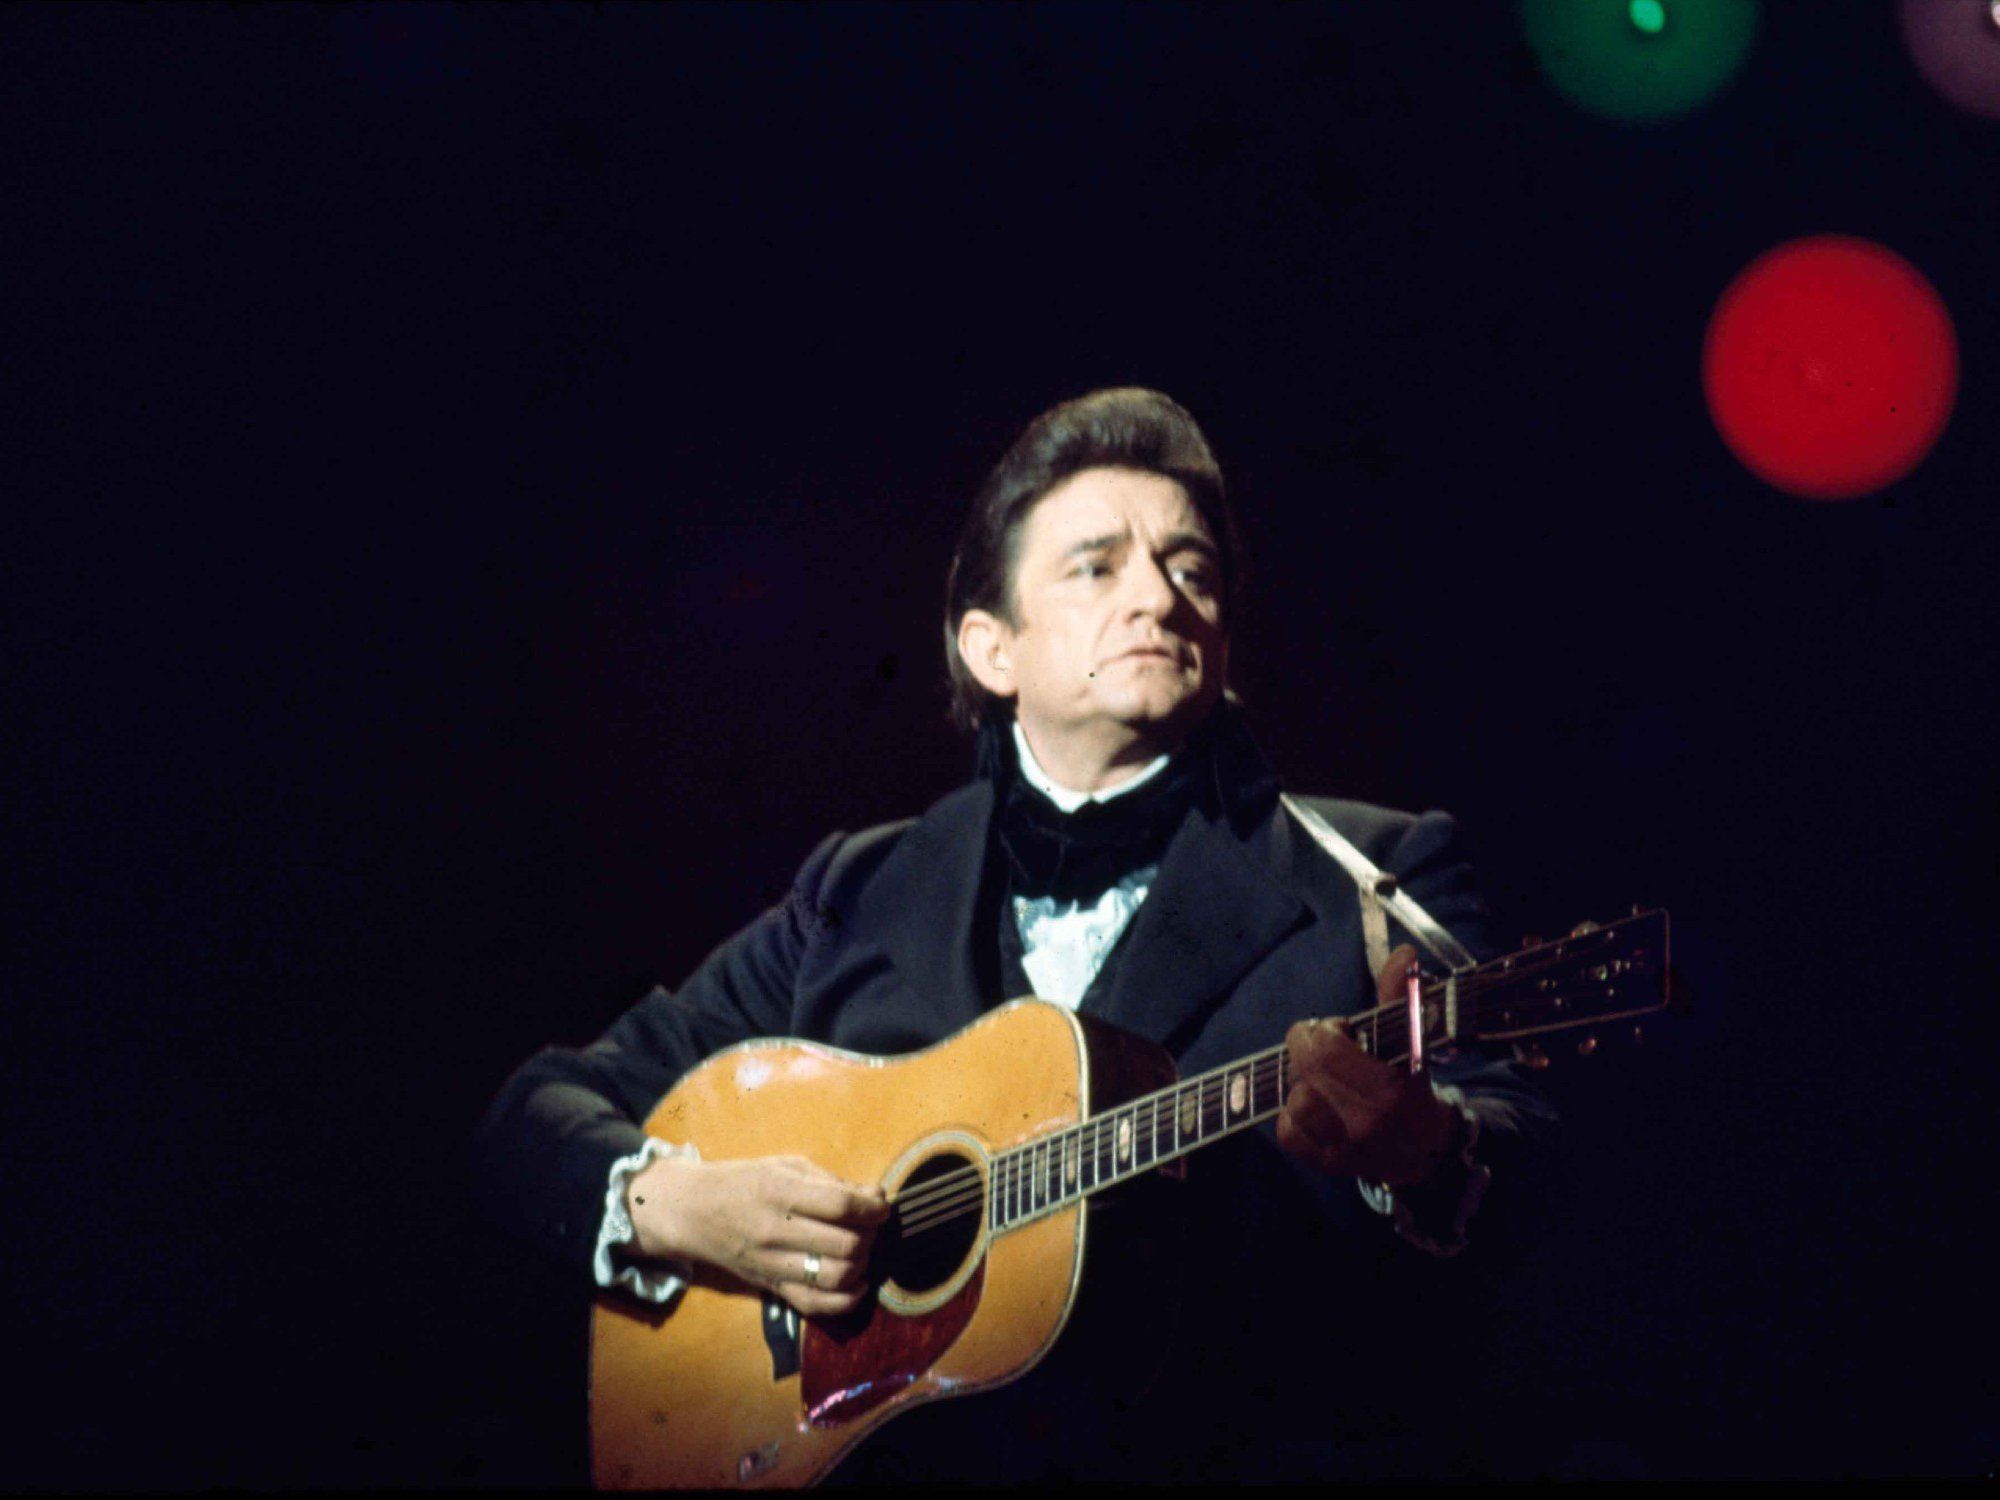 Johnny Cash The Official Concert Experience ?id=33725346&width=2000&height=1500&coordinates=0%2C0%2C0%2C0